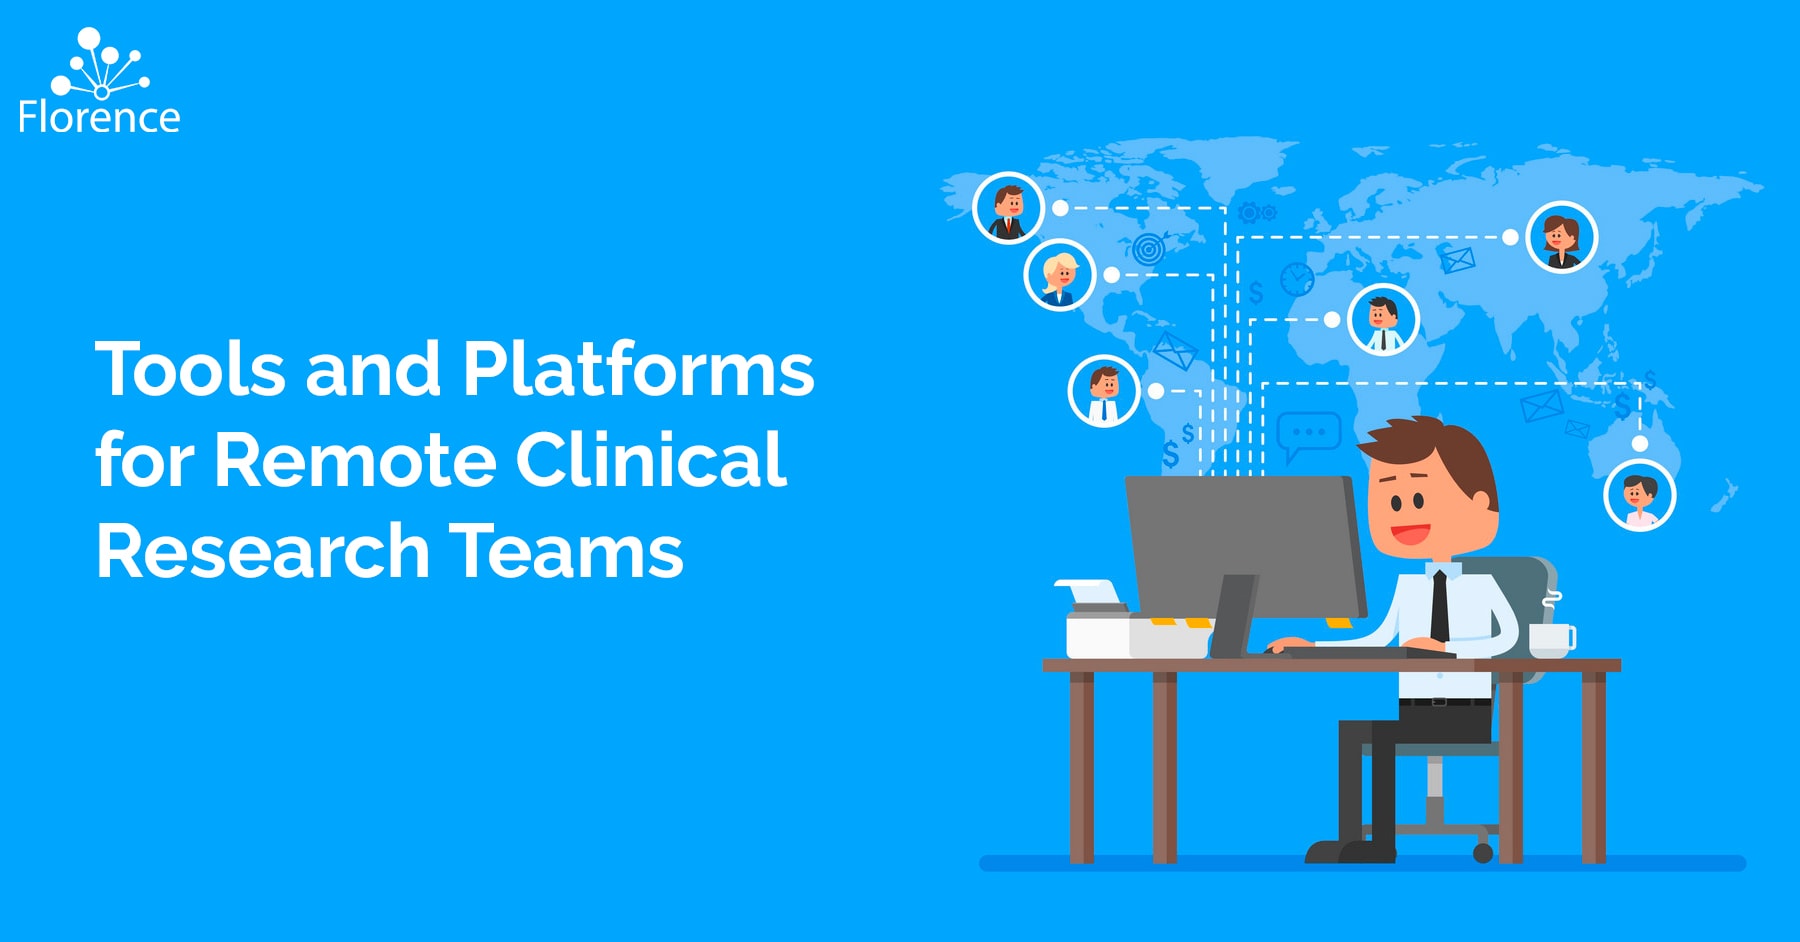 clinical research positions remote